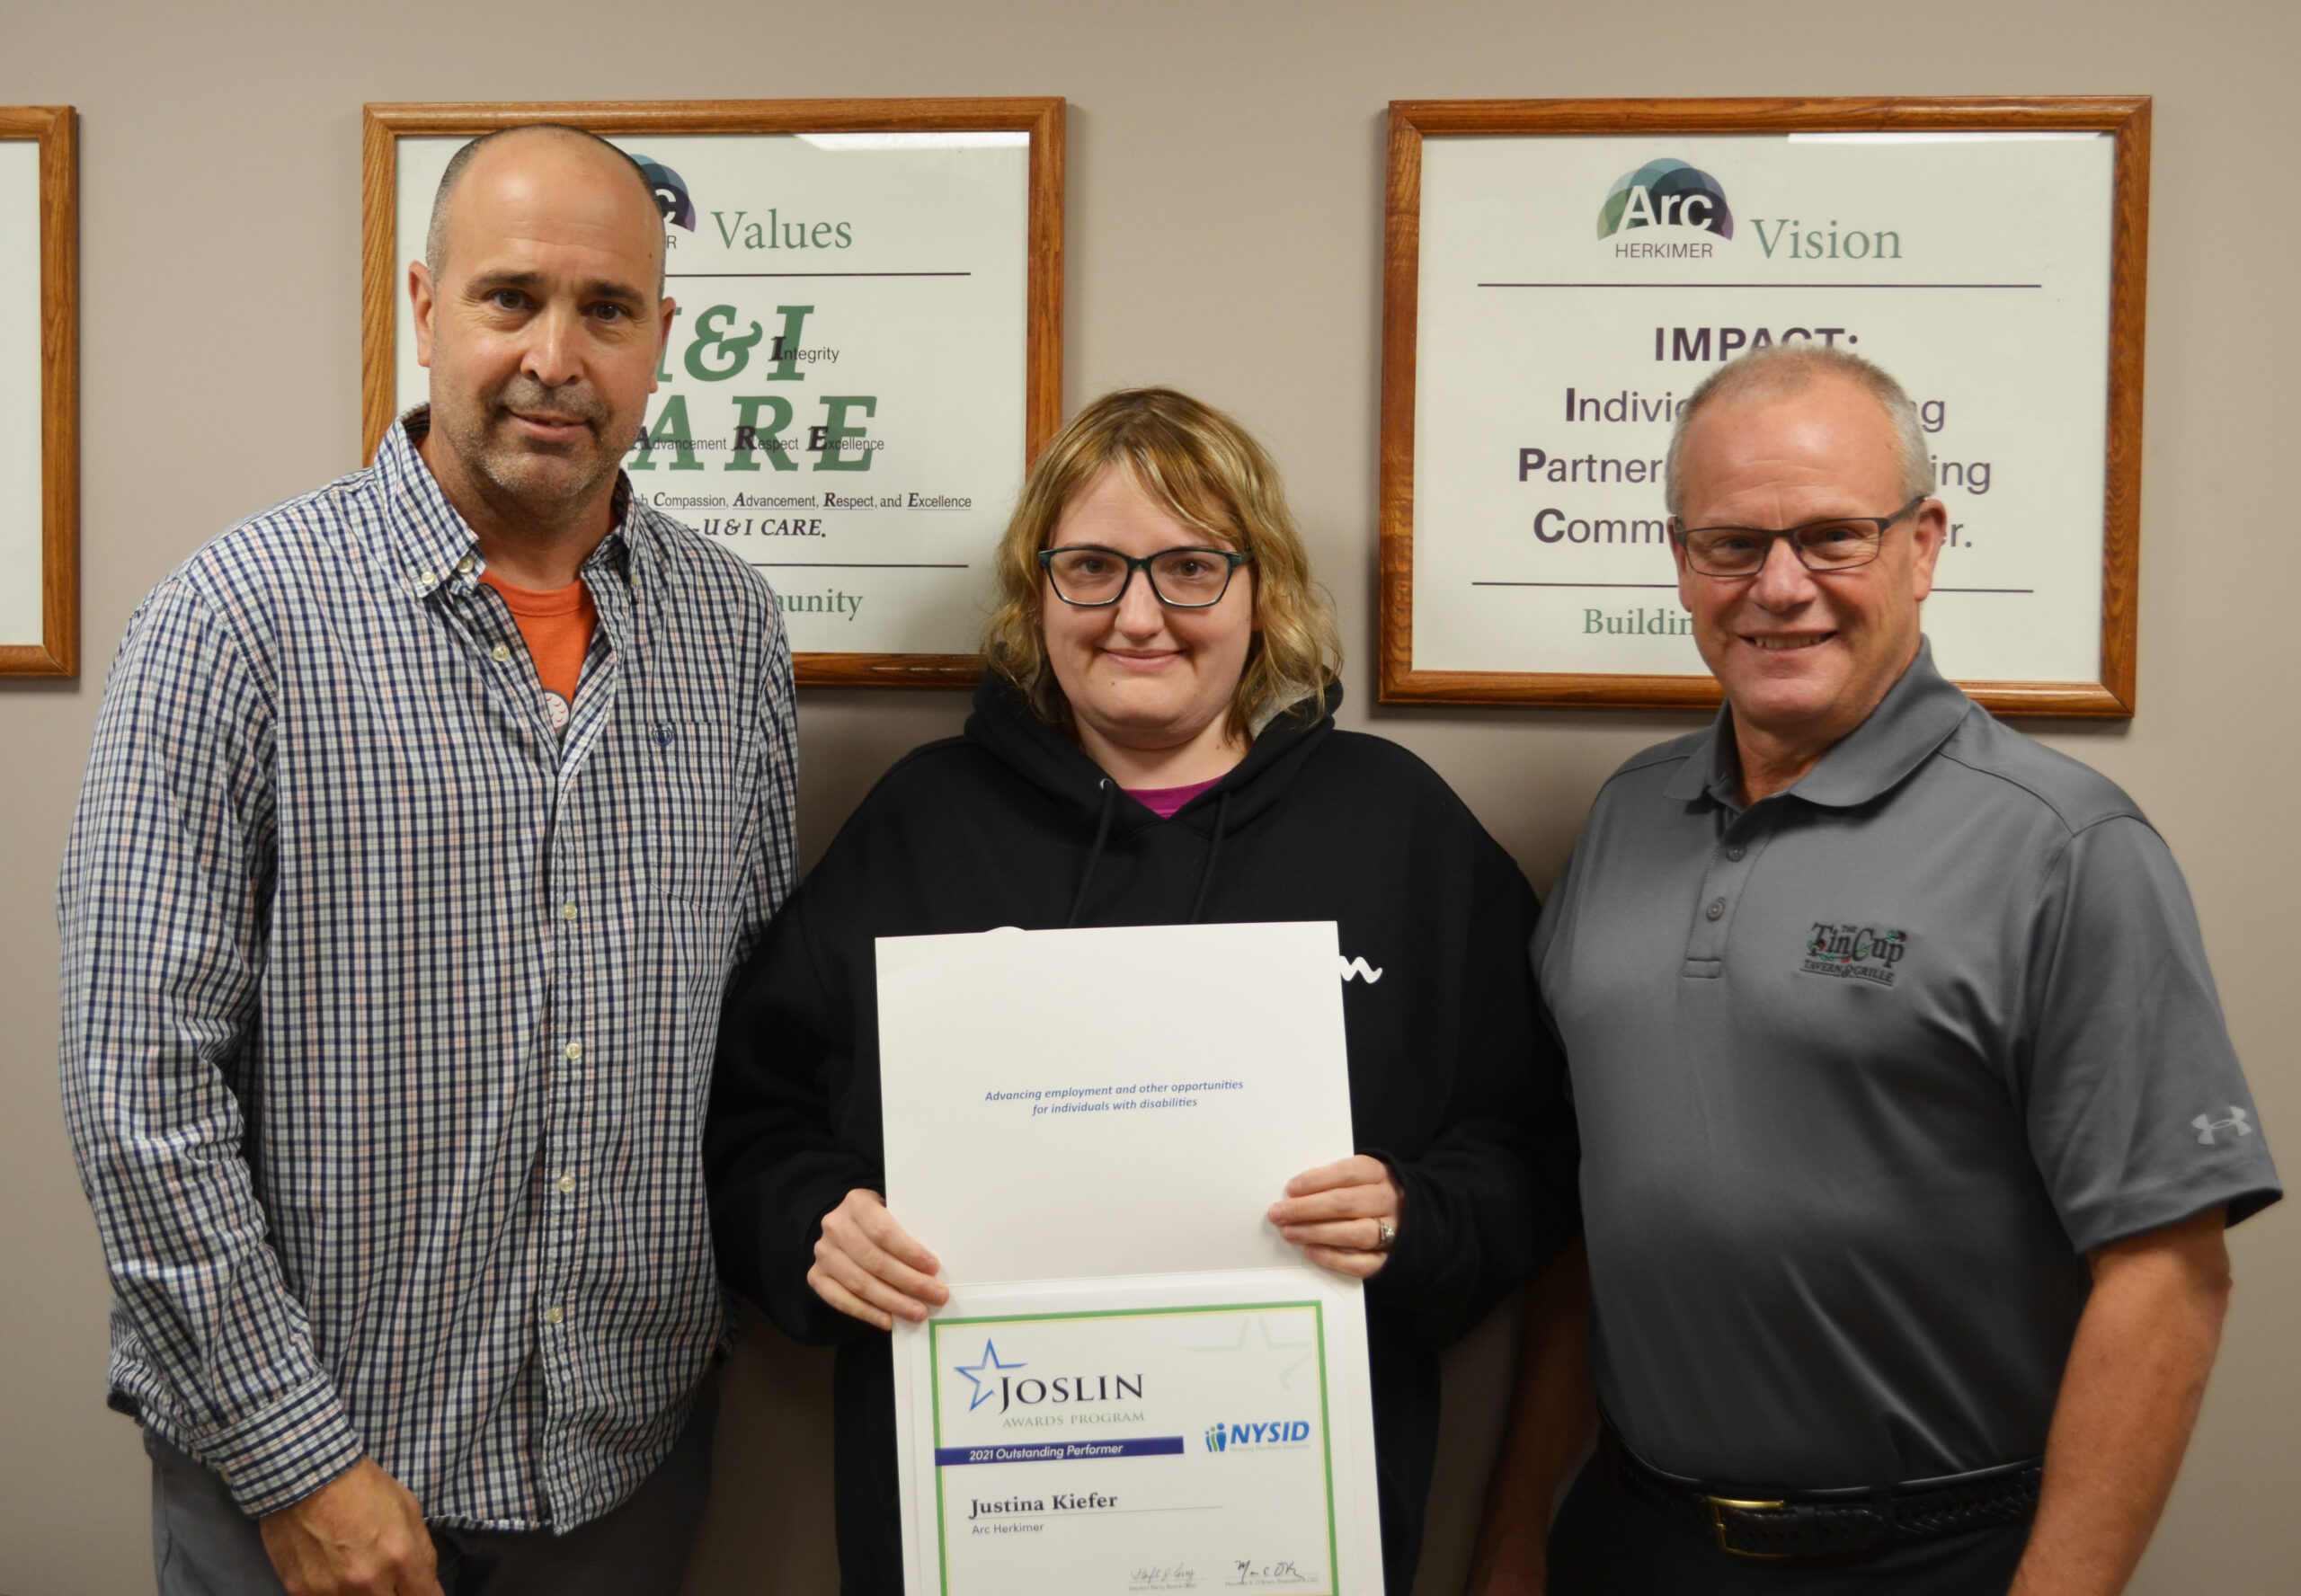 Arc Herkimer’s Justina Kiefer Recognized with NYSID’s 2021 Joslin Award for Exceptional Performance at Herkimer Industries During National Disability Employment Awareness Month